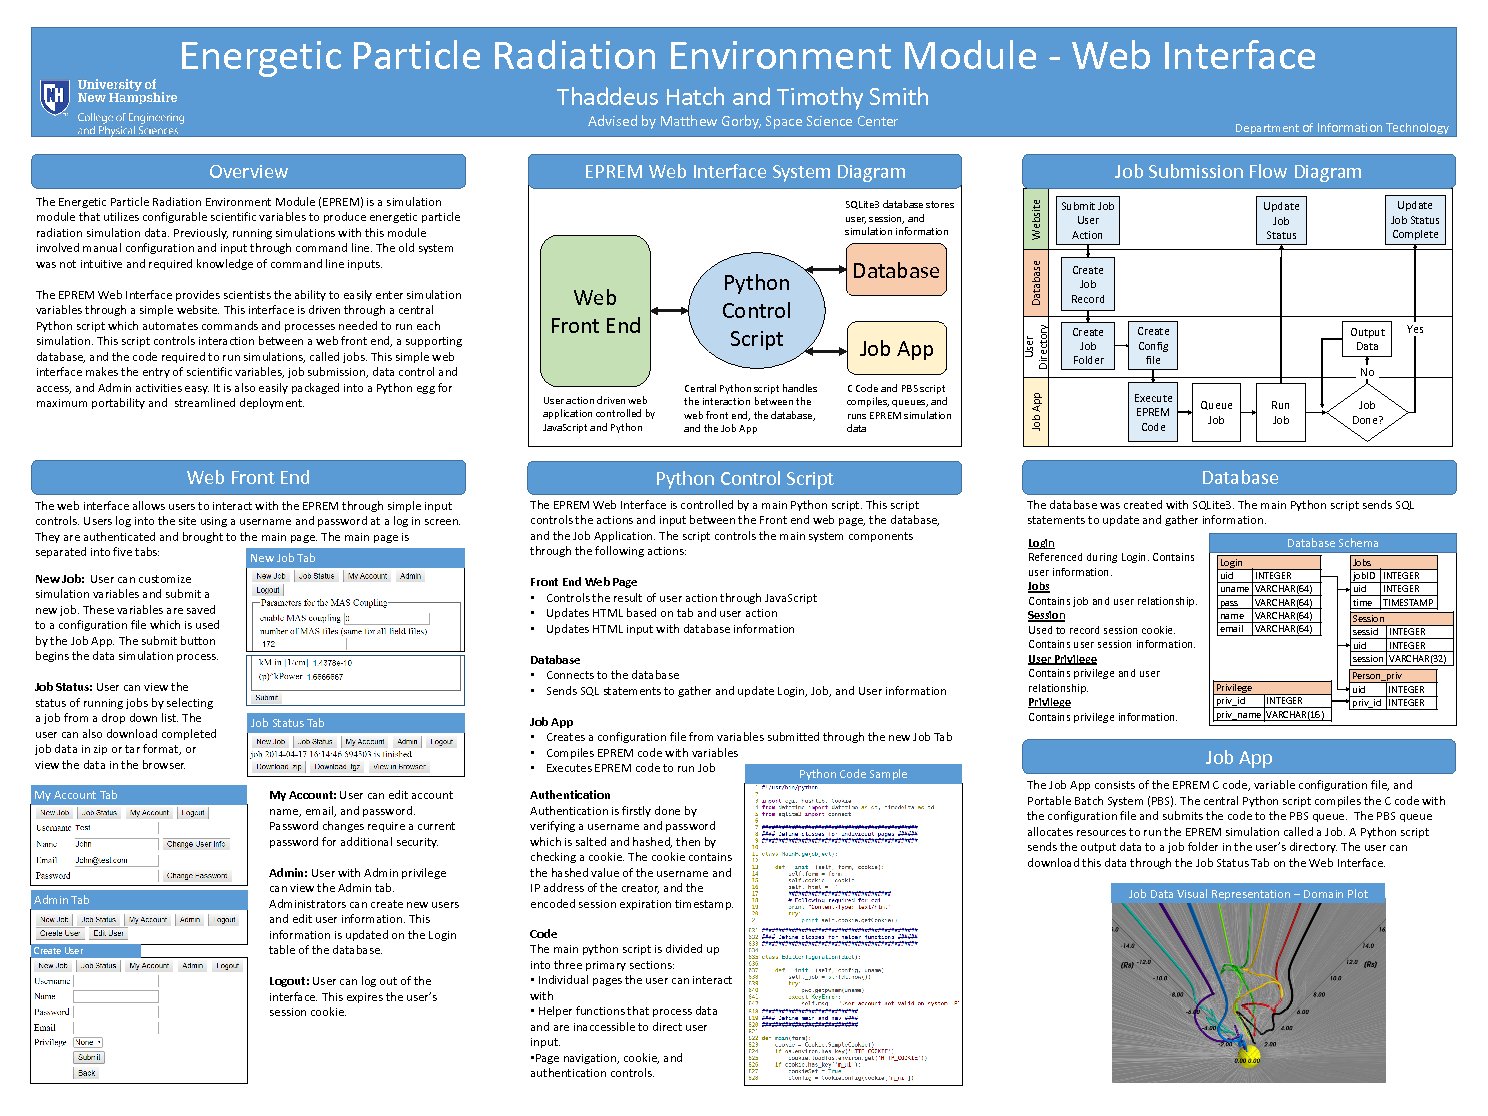 Energetic Particle Radiation Environment Module - Web Interface by tjv45